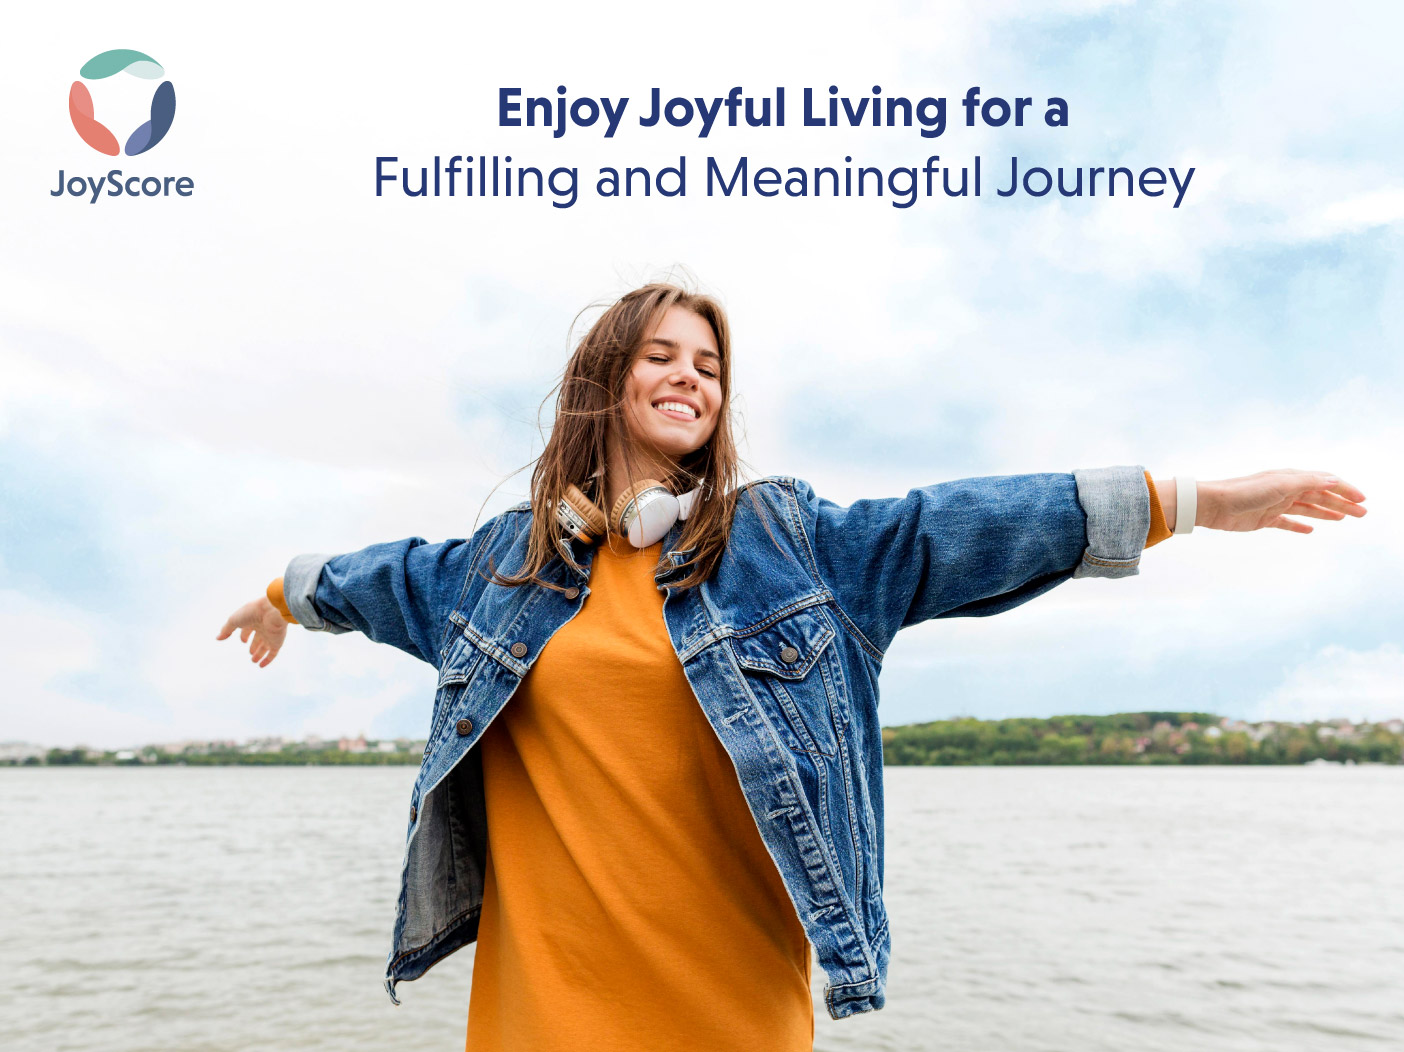 Enjoy Joyful Living for a Fulfilling and Meaningful Journey